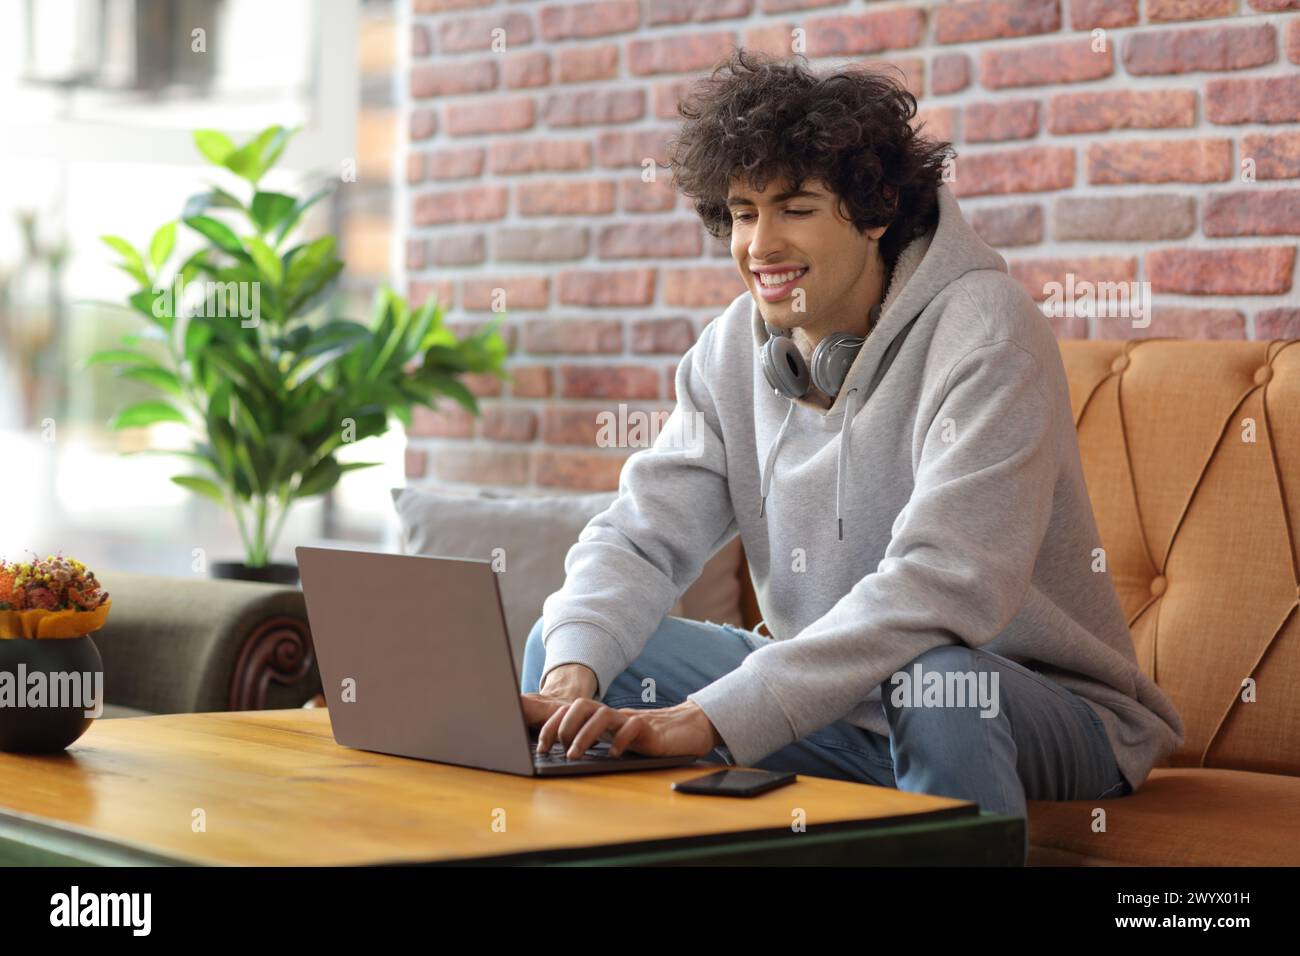 Student in a cafe sitting on a sofa and using a laptop computer Stock Photo